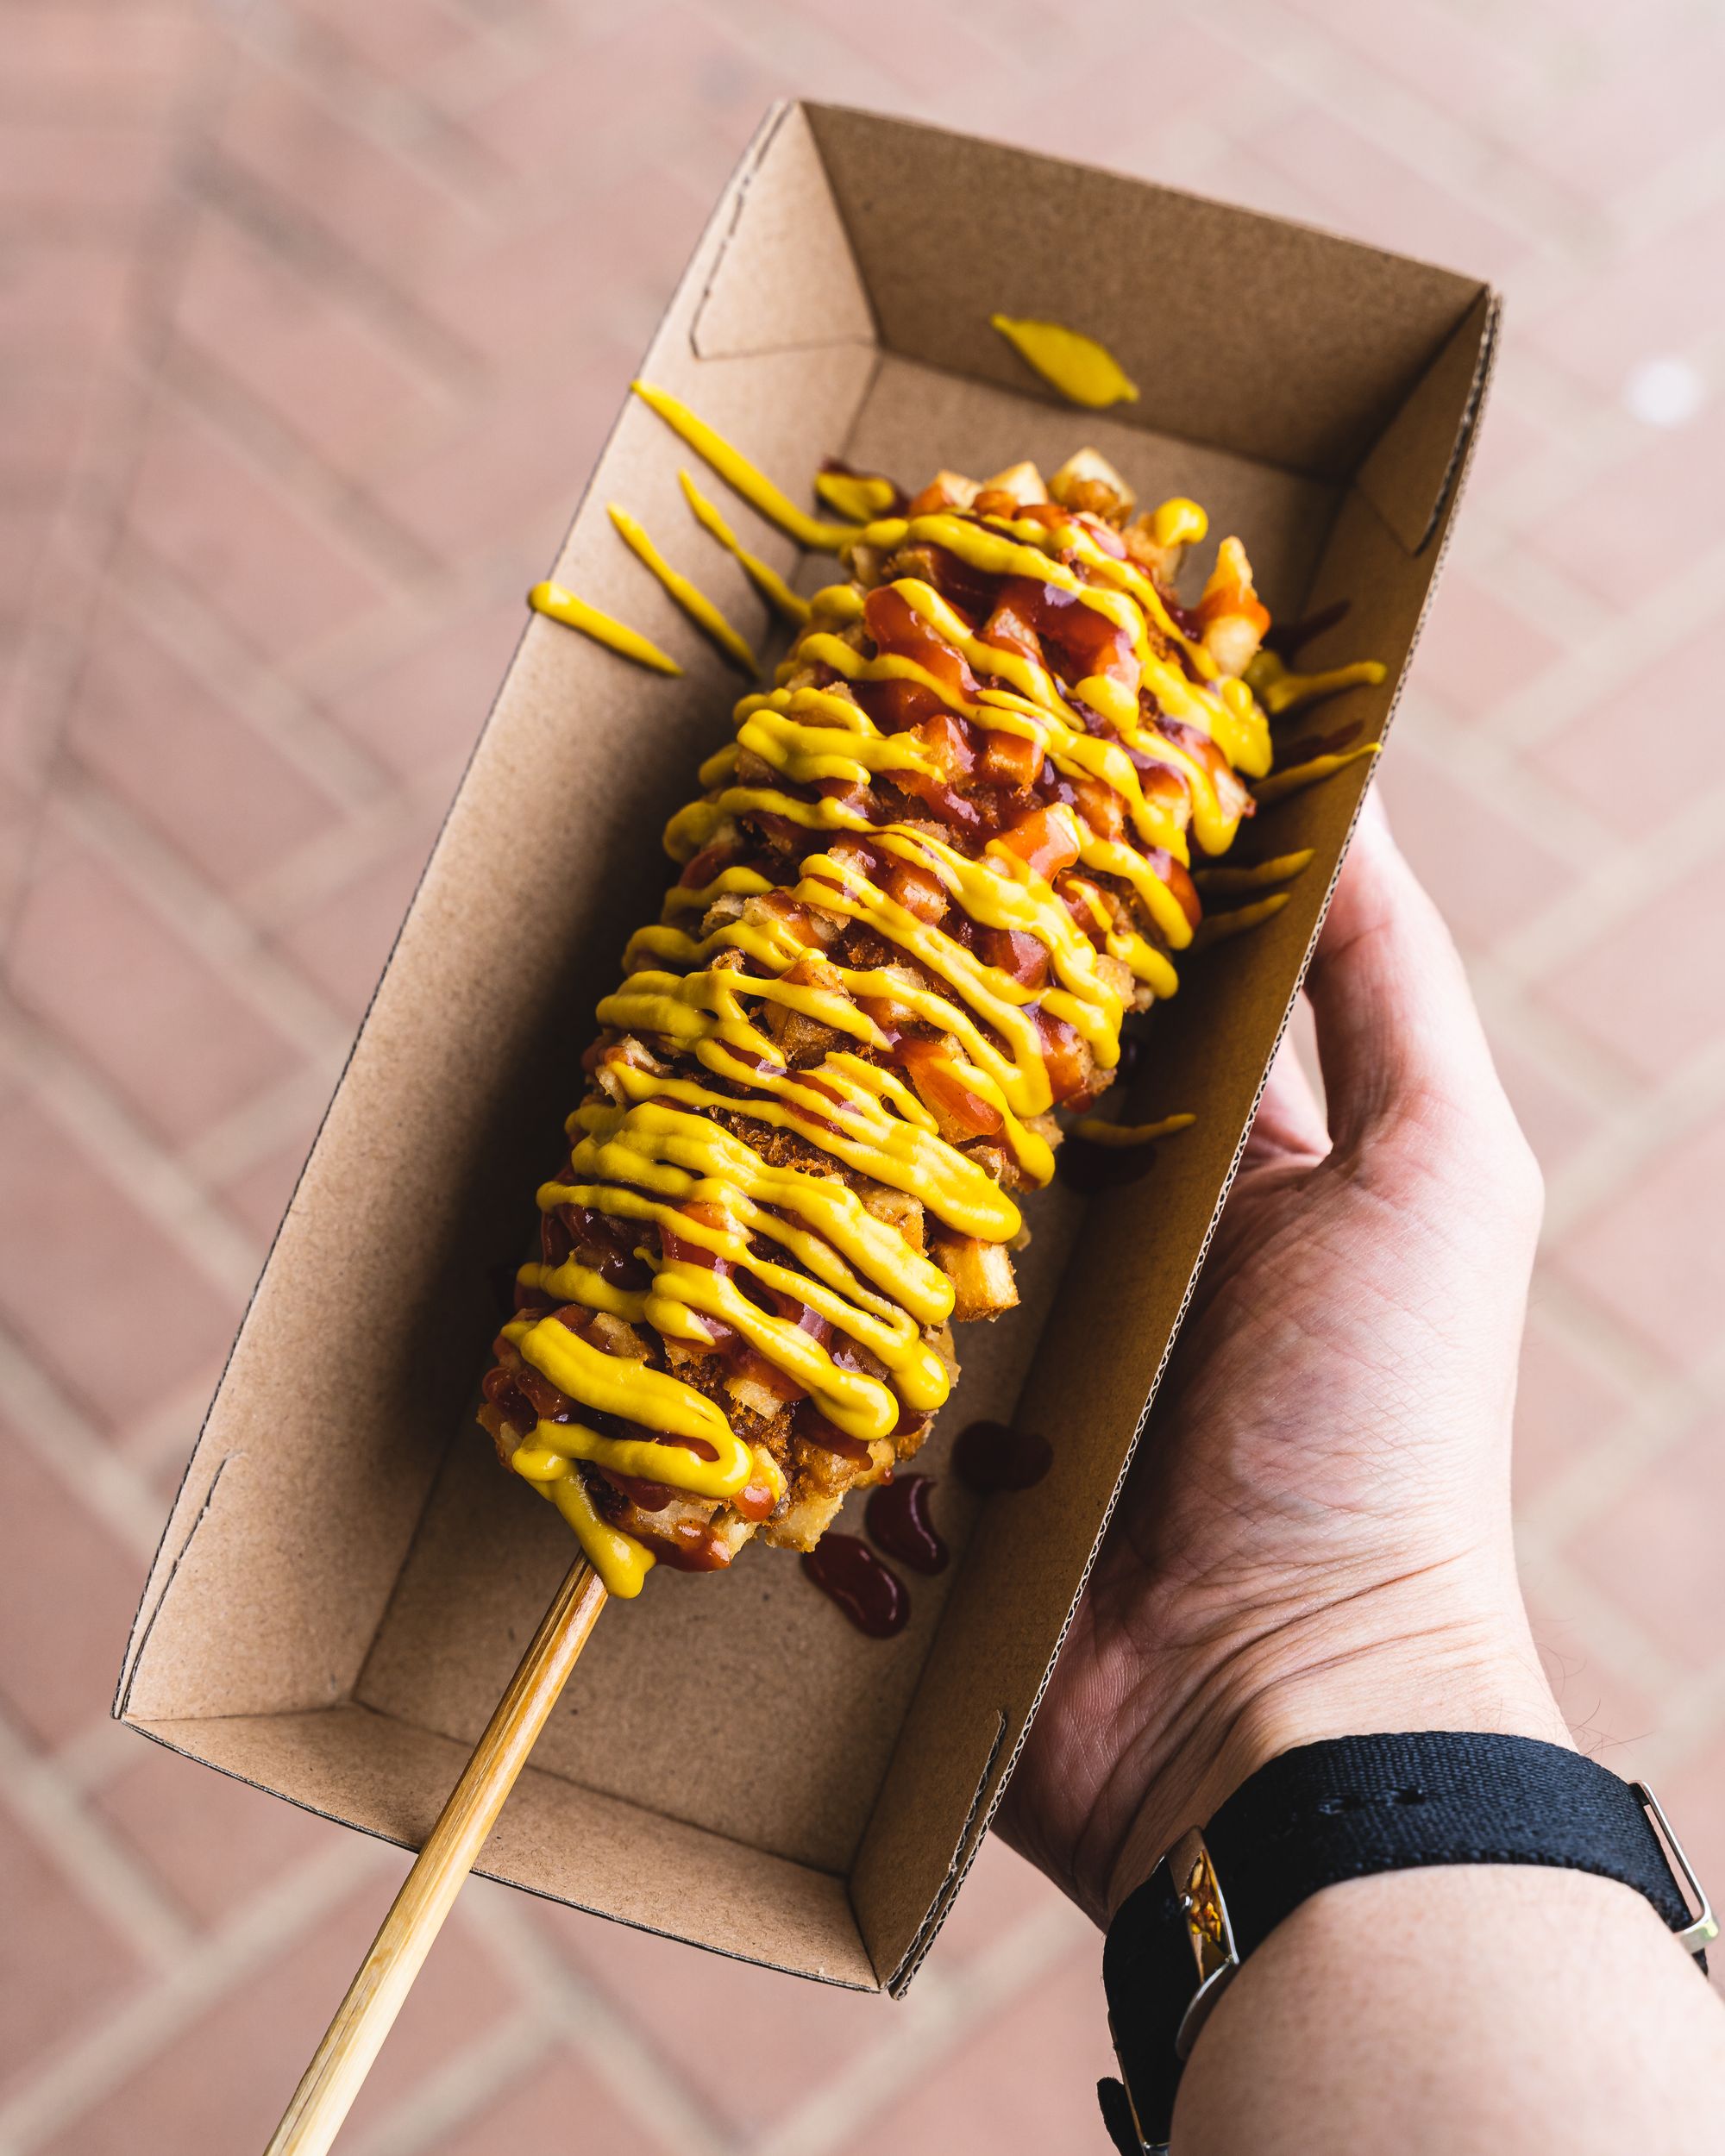 Hand holding a Korean street dog in a tray, covered in mustard and tomato sauce